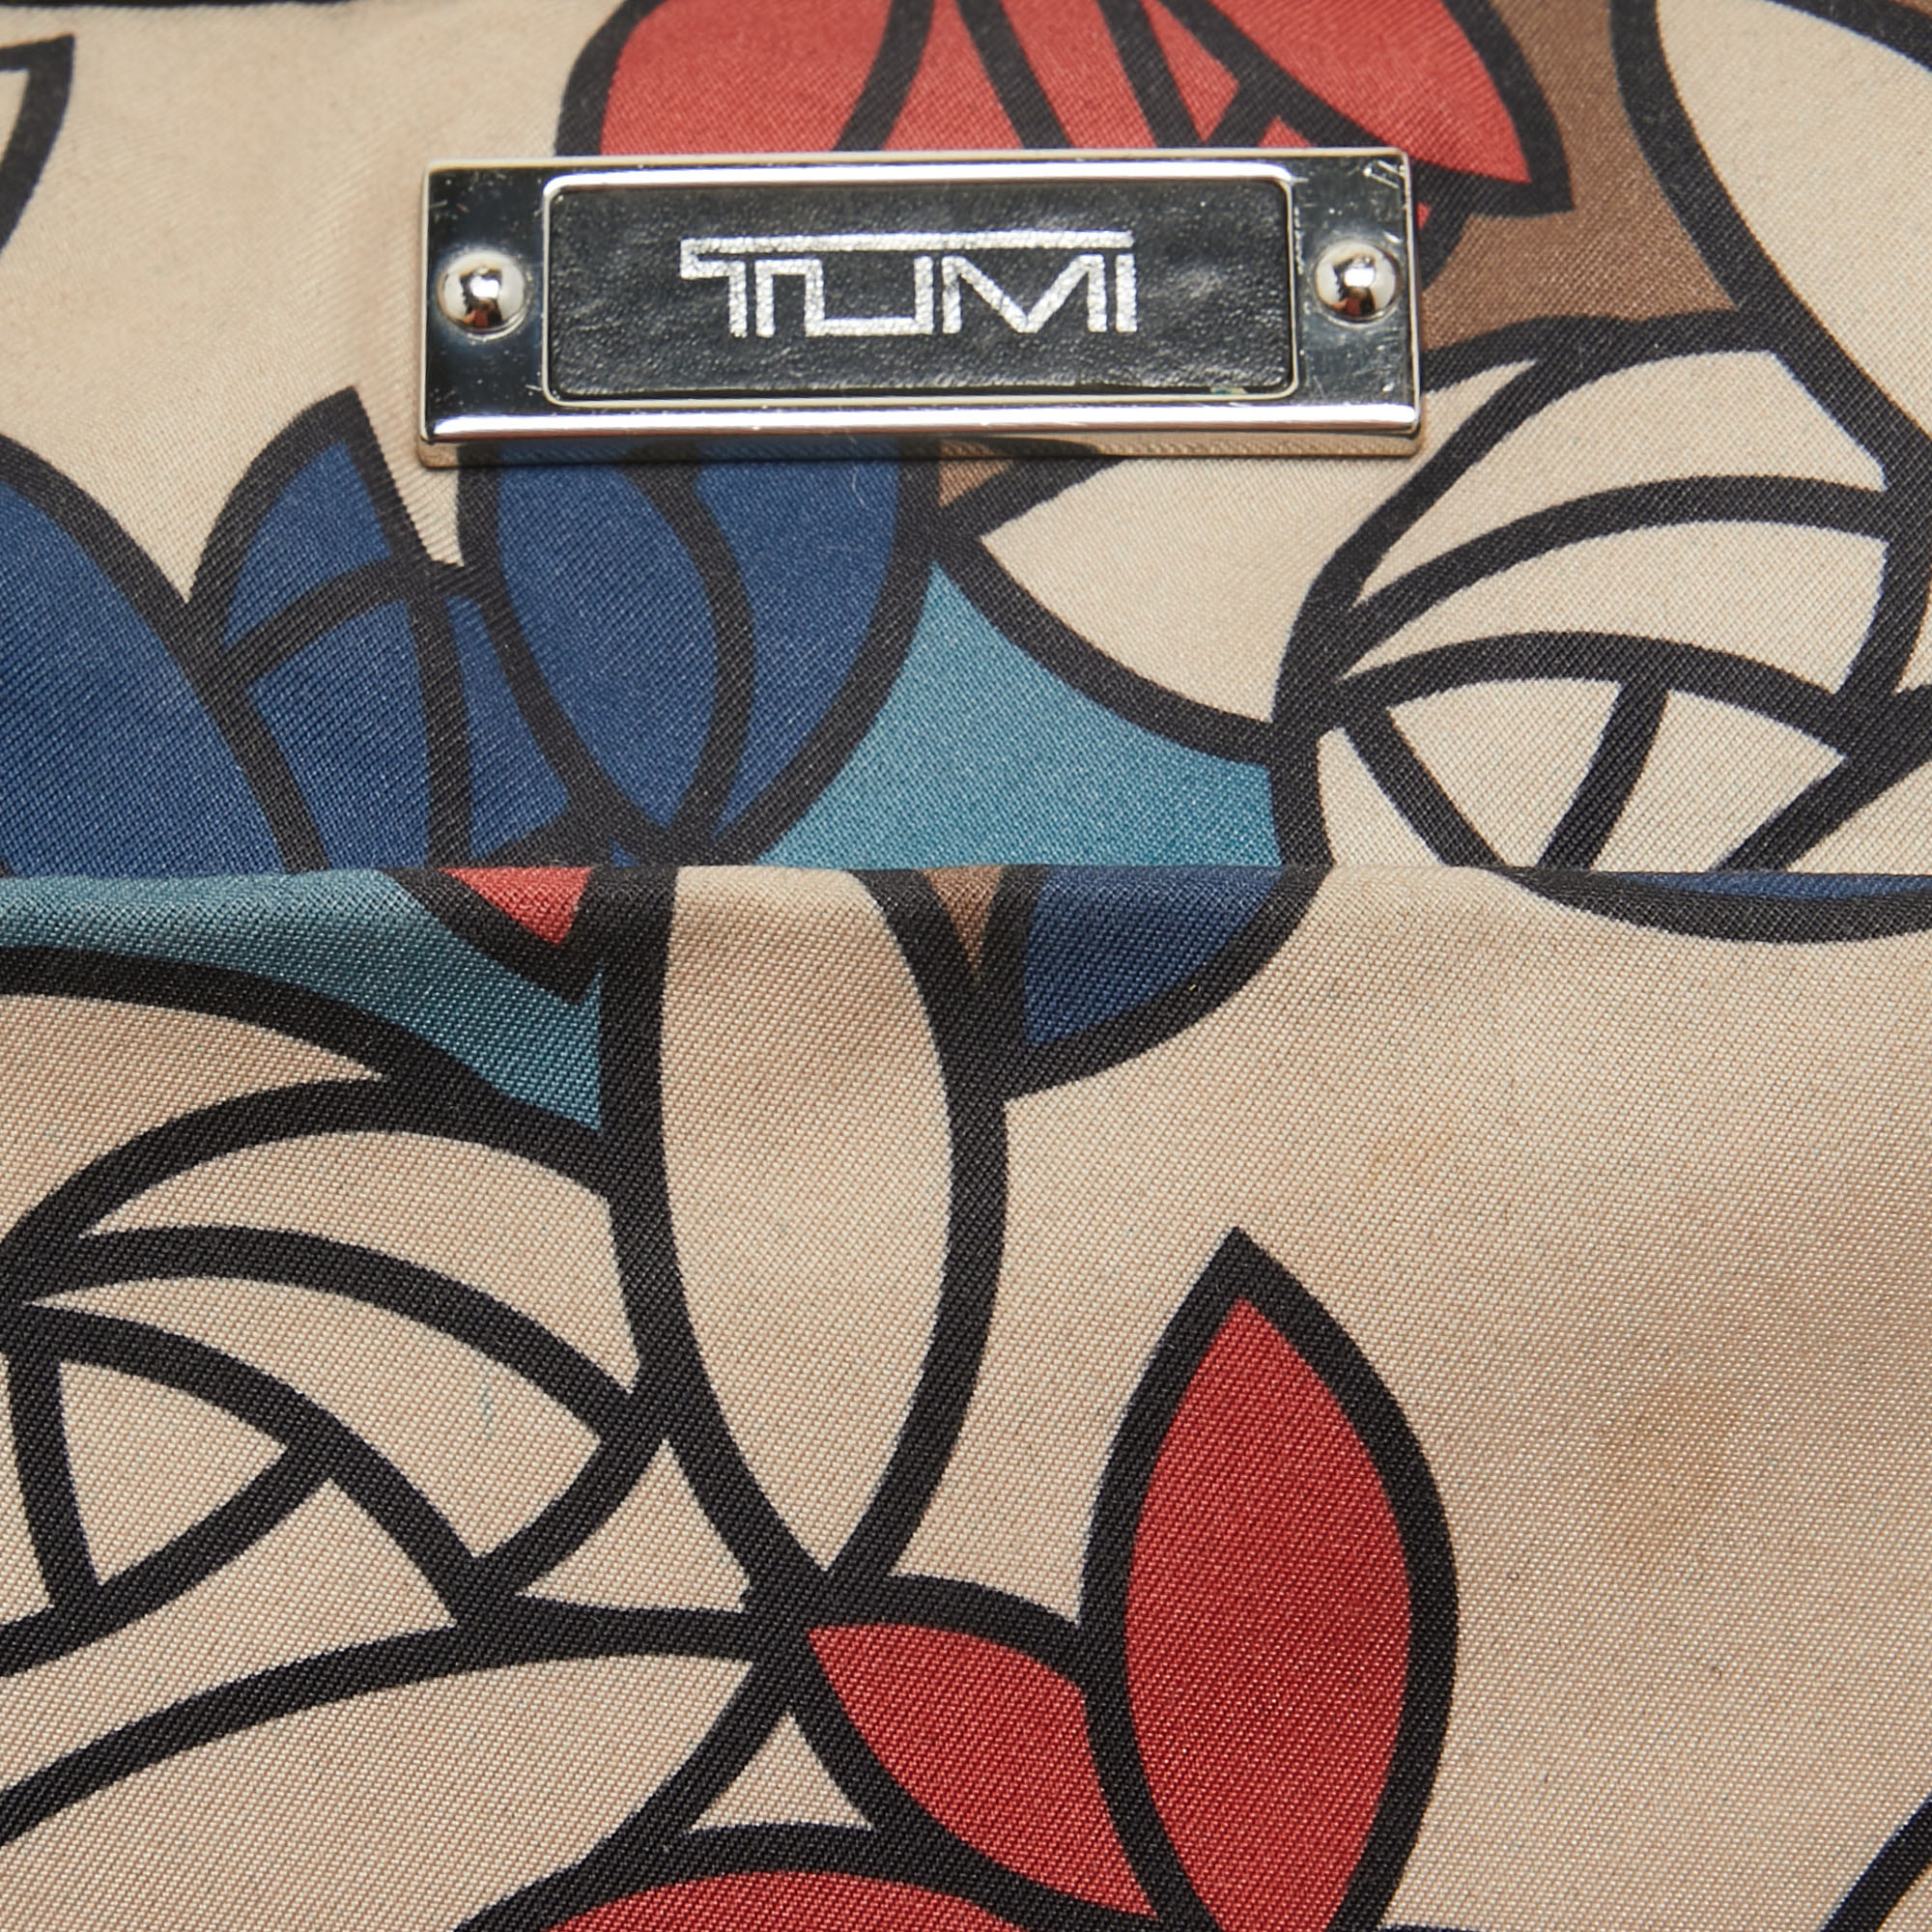 TUMI Multicolor Printed Nylon And Leather Zip Messenger Bag